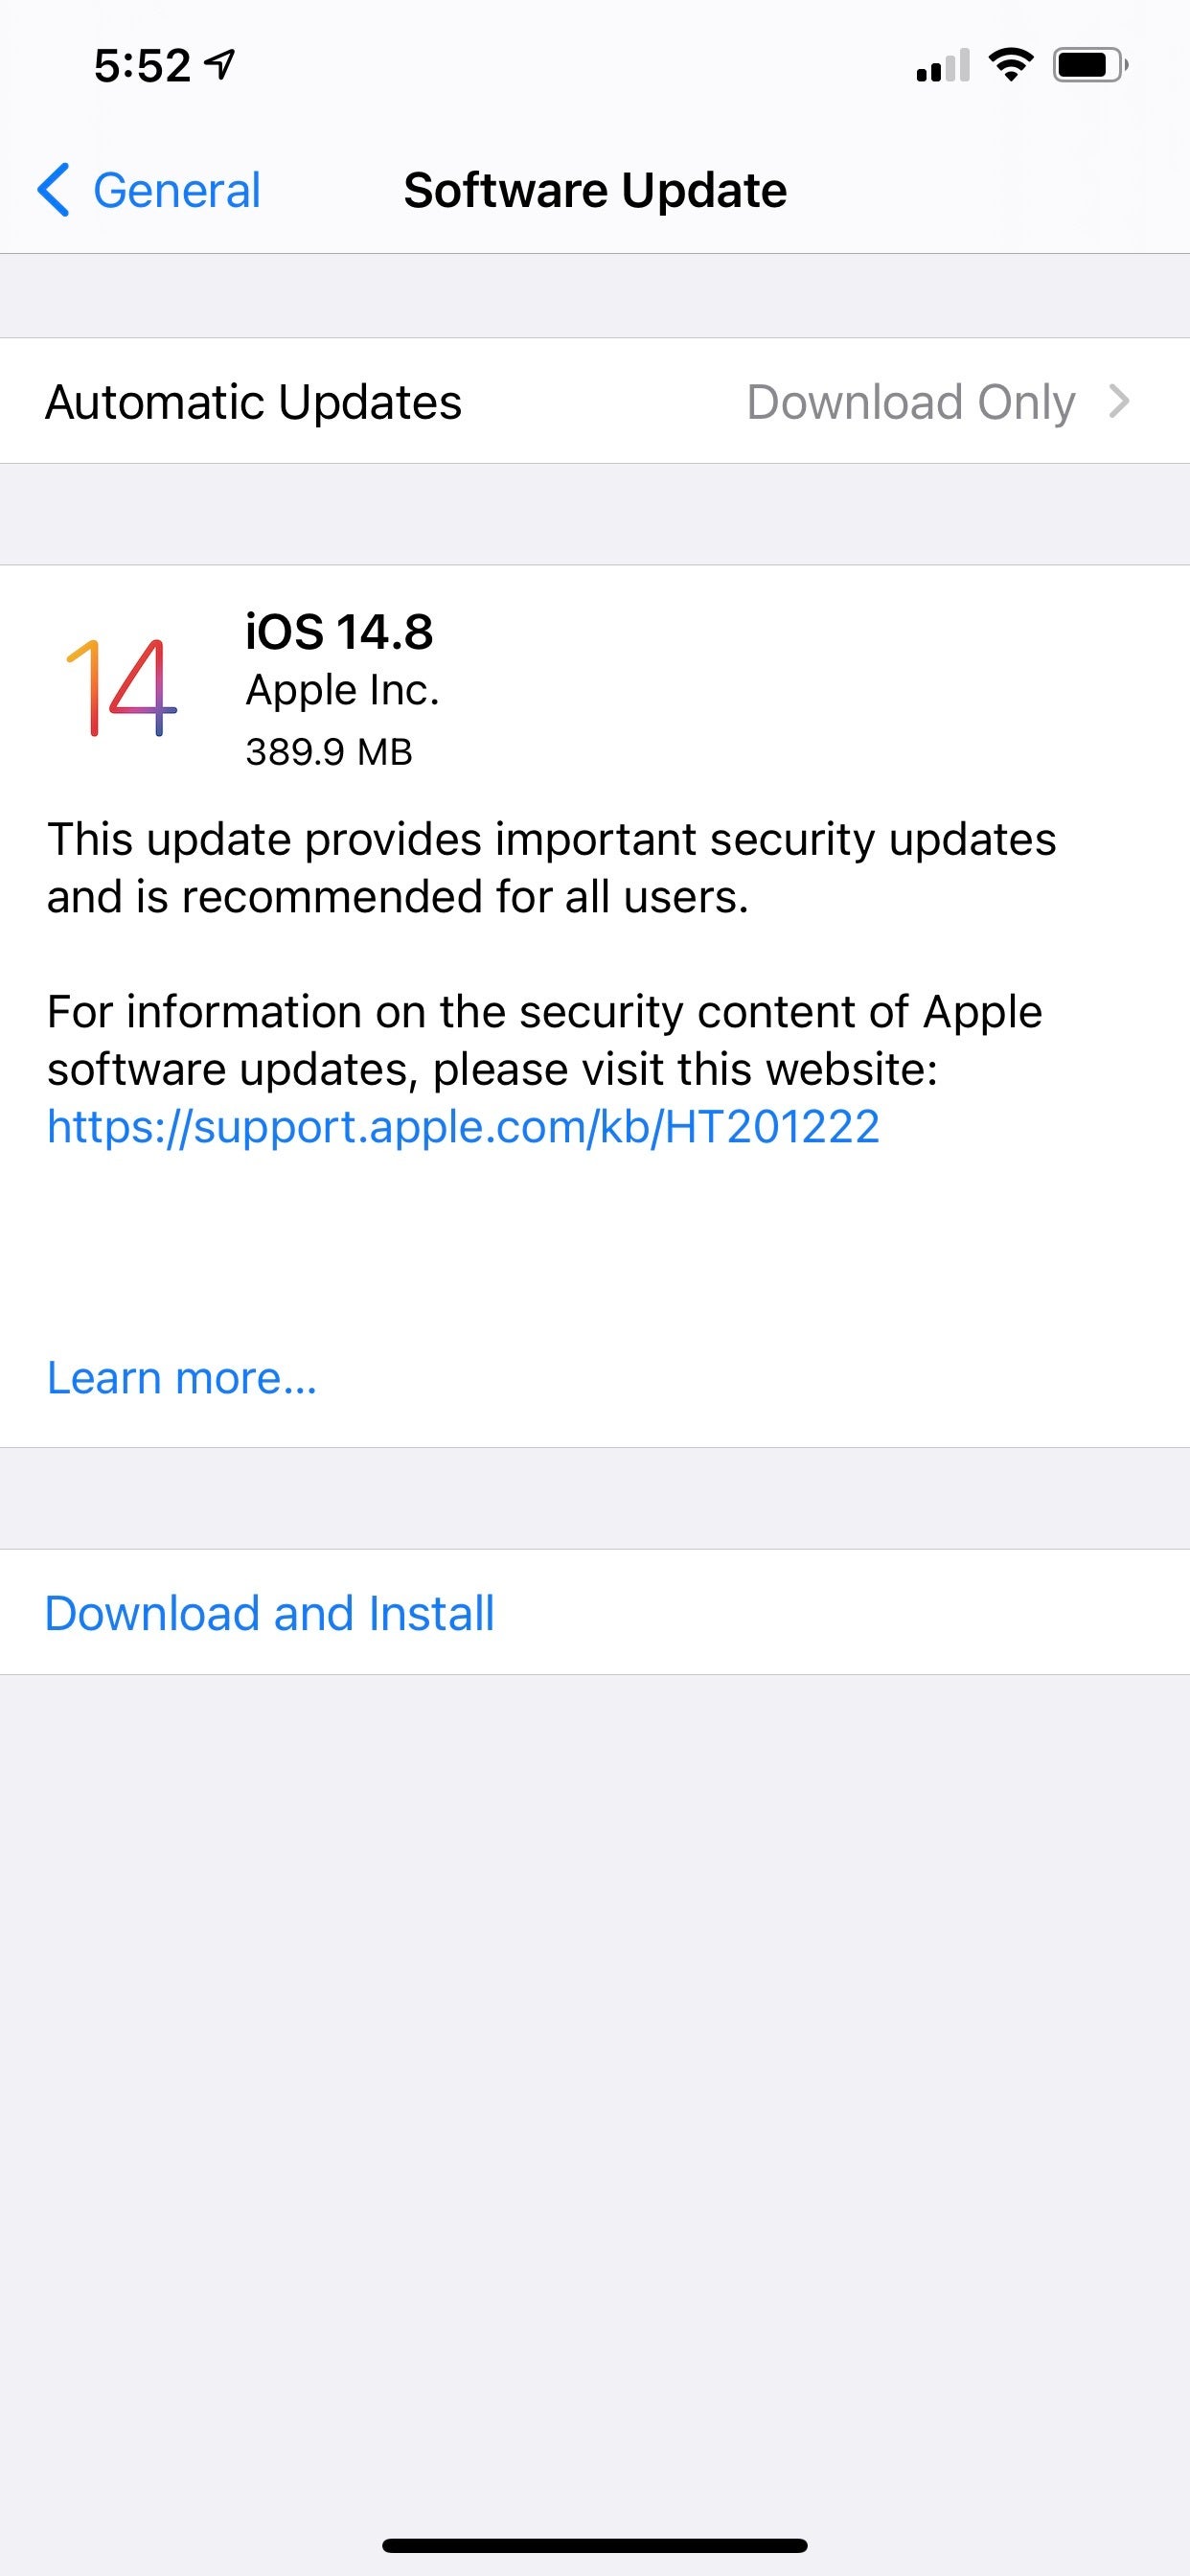 Apple pushes out an emergency software update for the iPhone - Apple iPhone users need to install this emergency iOS 14.8 update ASAP!